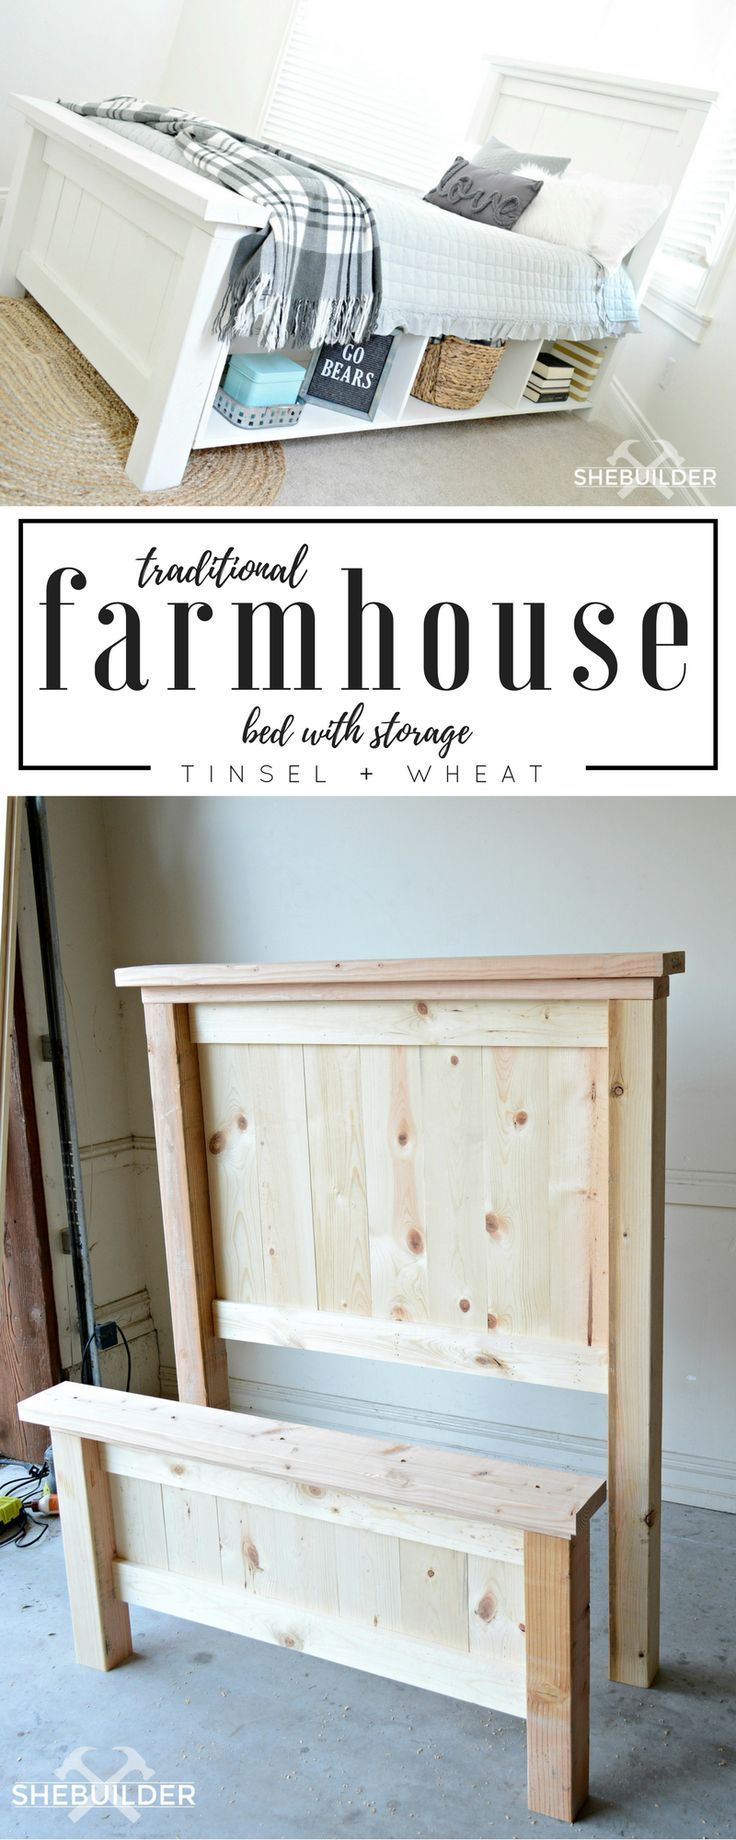 Traditional Farmhouse Bed with Storage - Tinsel + Wheat -   17 diy Bed Frame for teens ideas